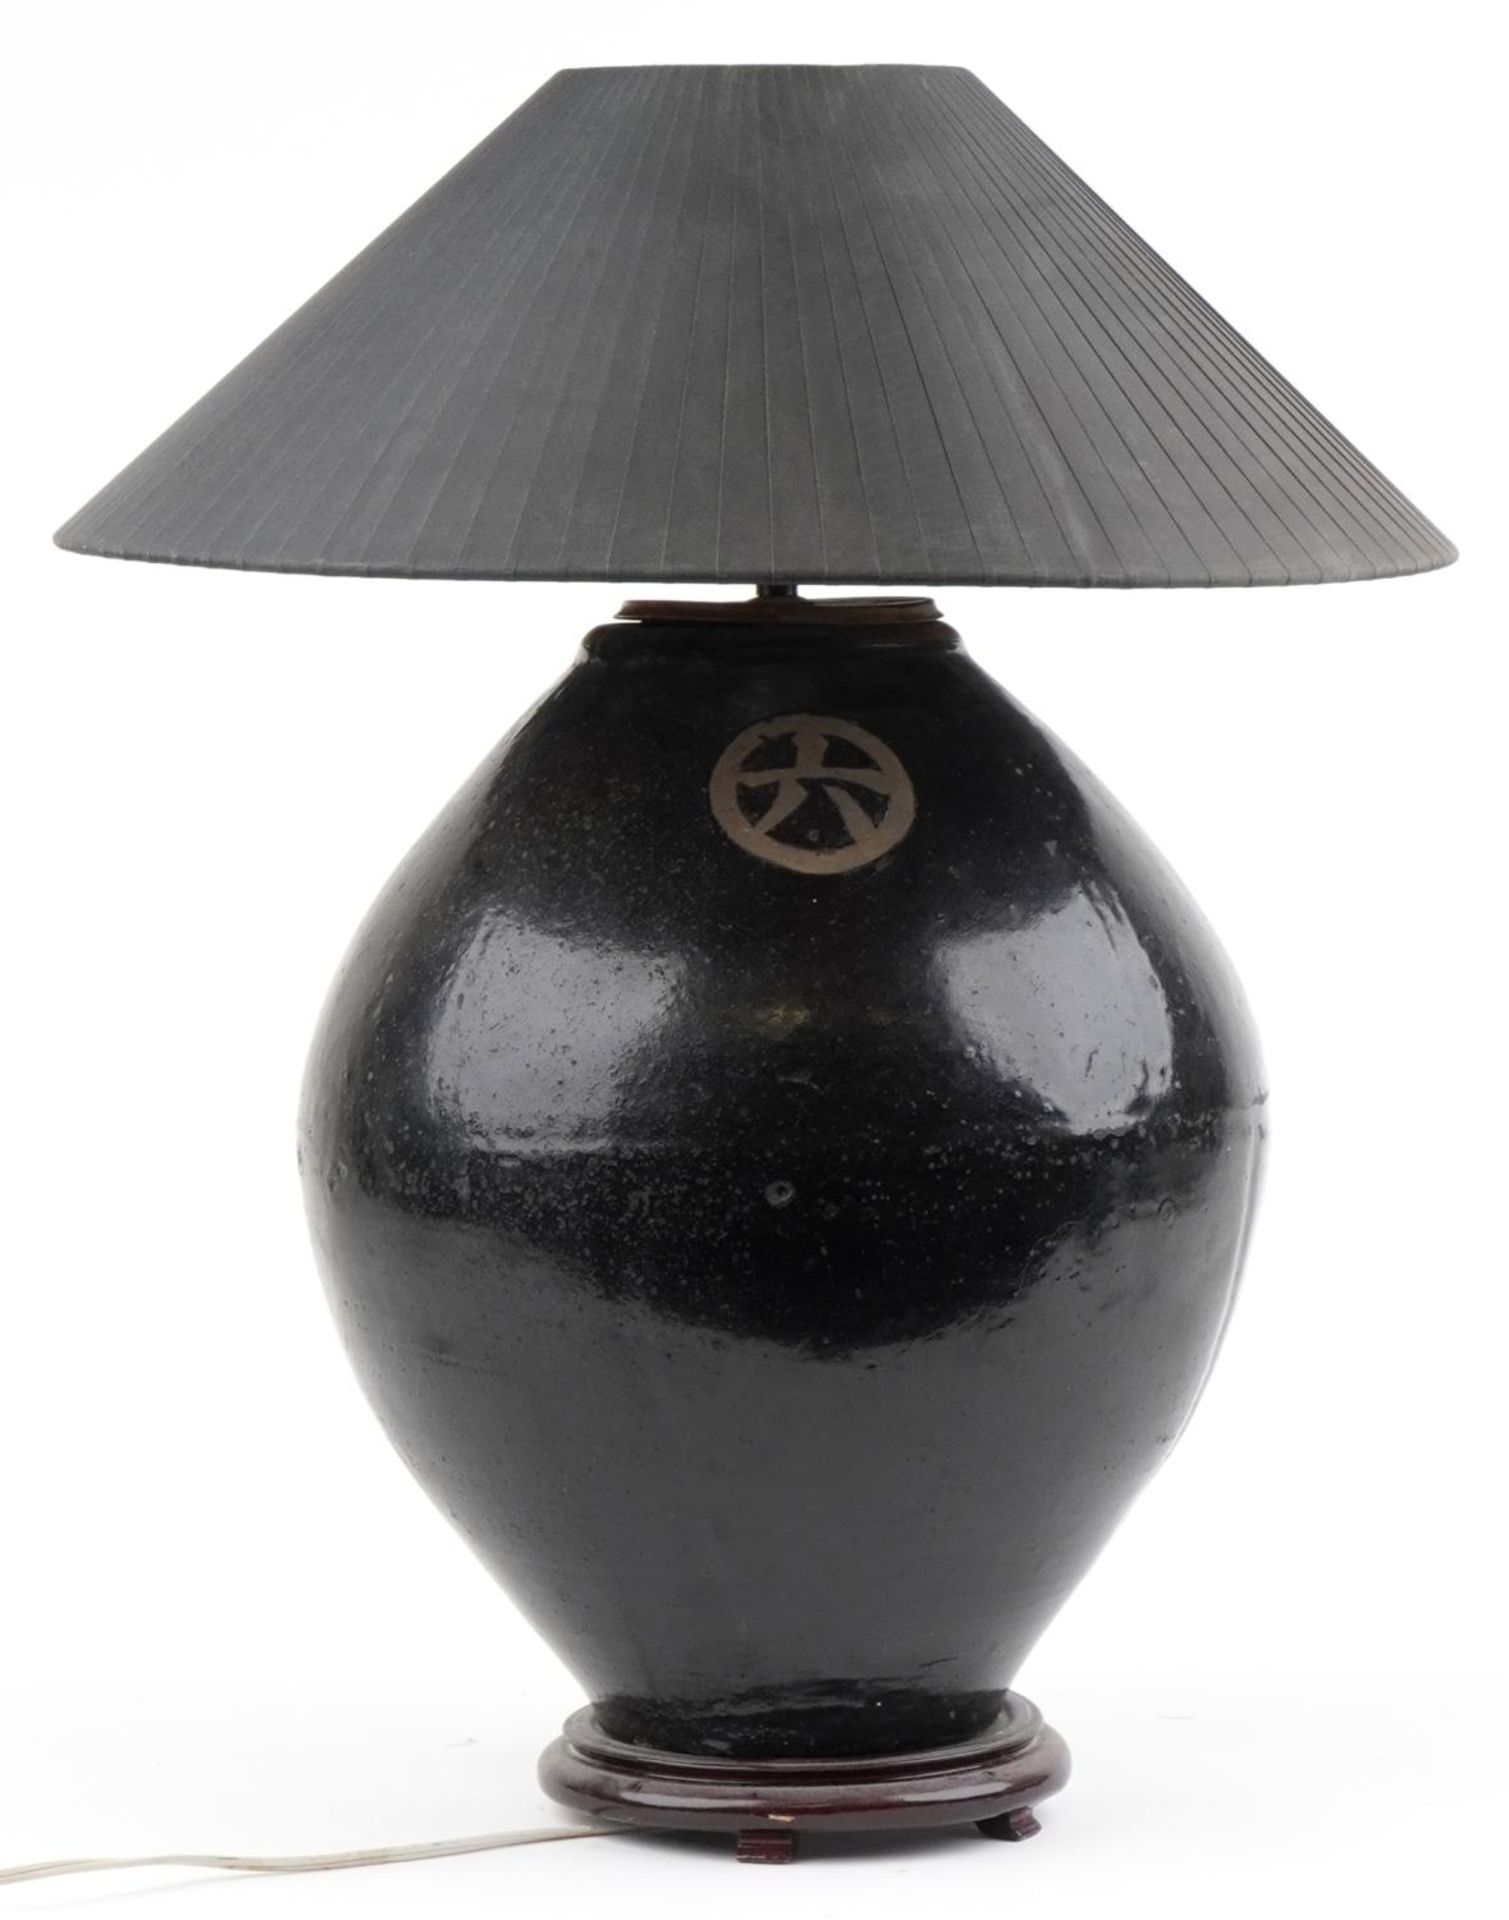 Large Chinese archaic style pottery jar adjustable table lamp with pleated shade, the jar incised